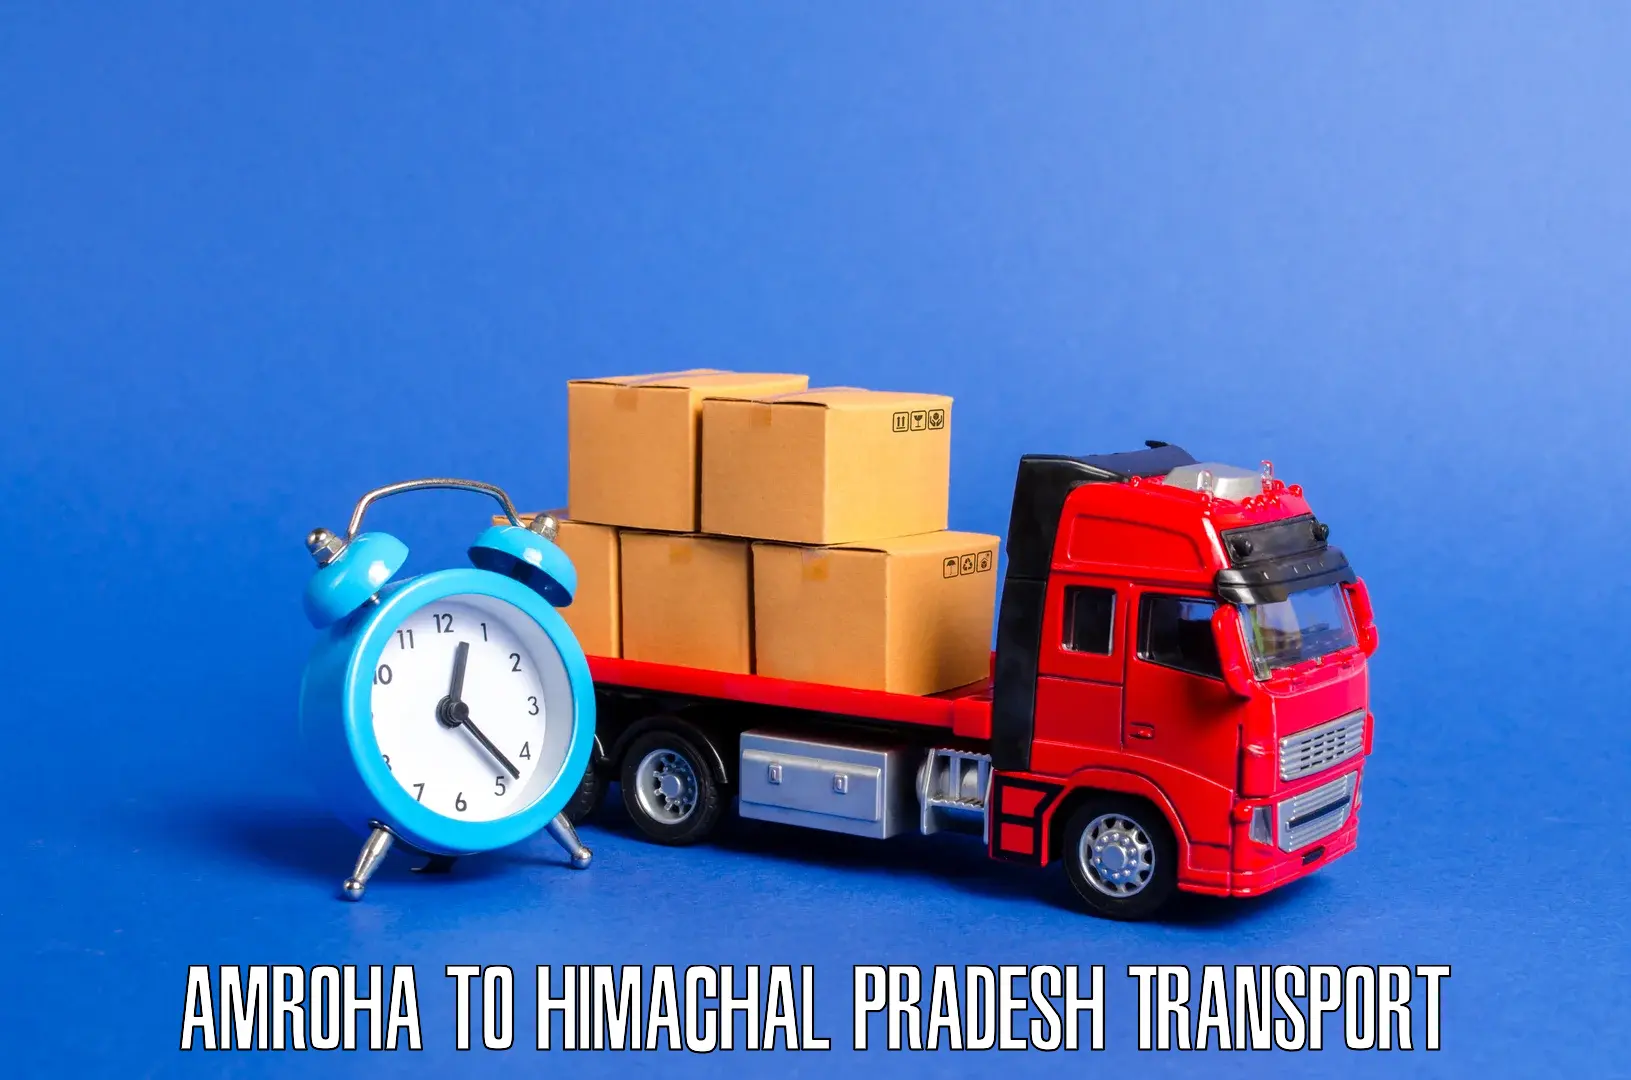 Express transport services in Amroha to Manali